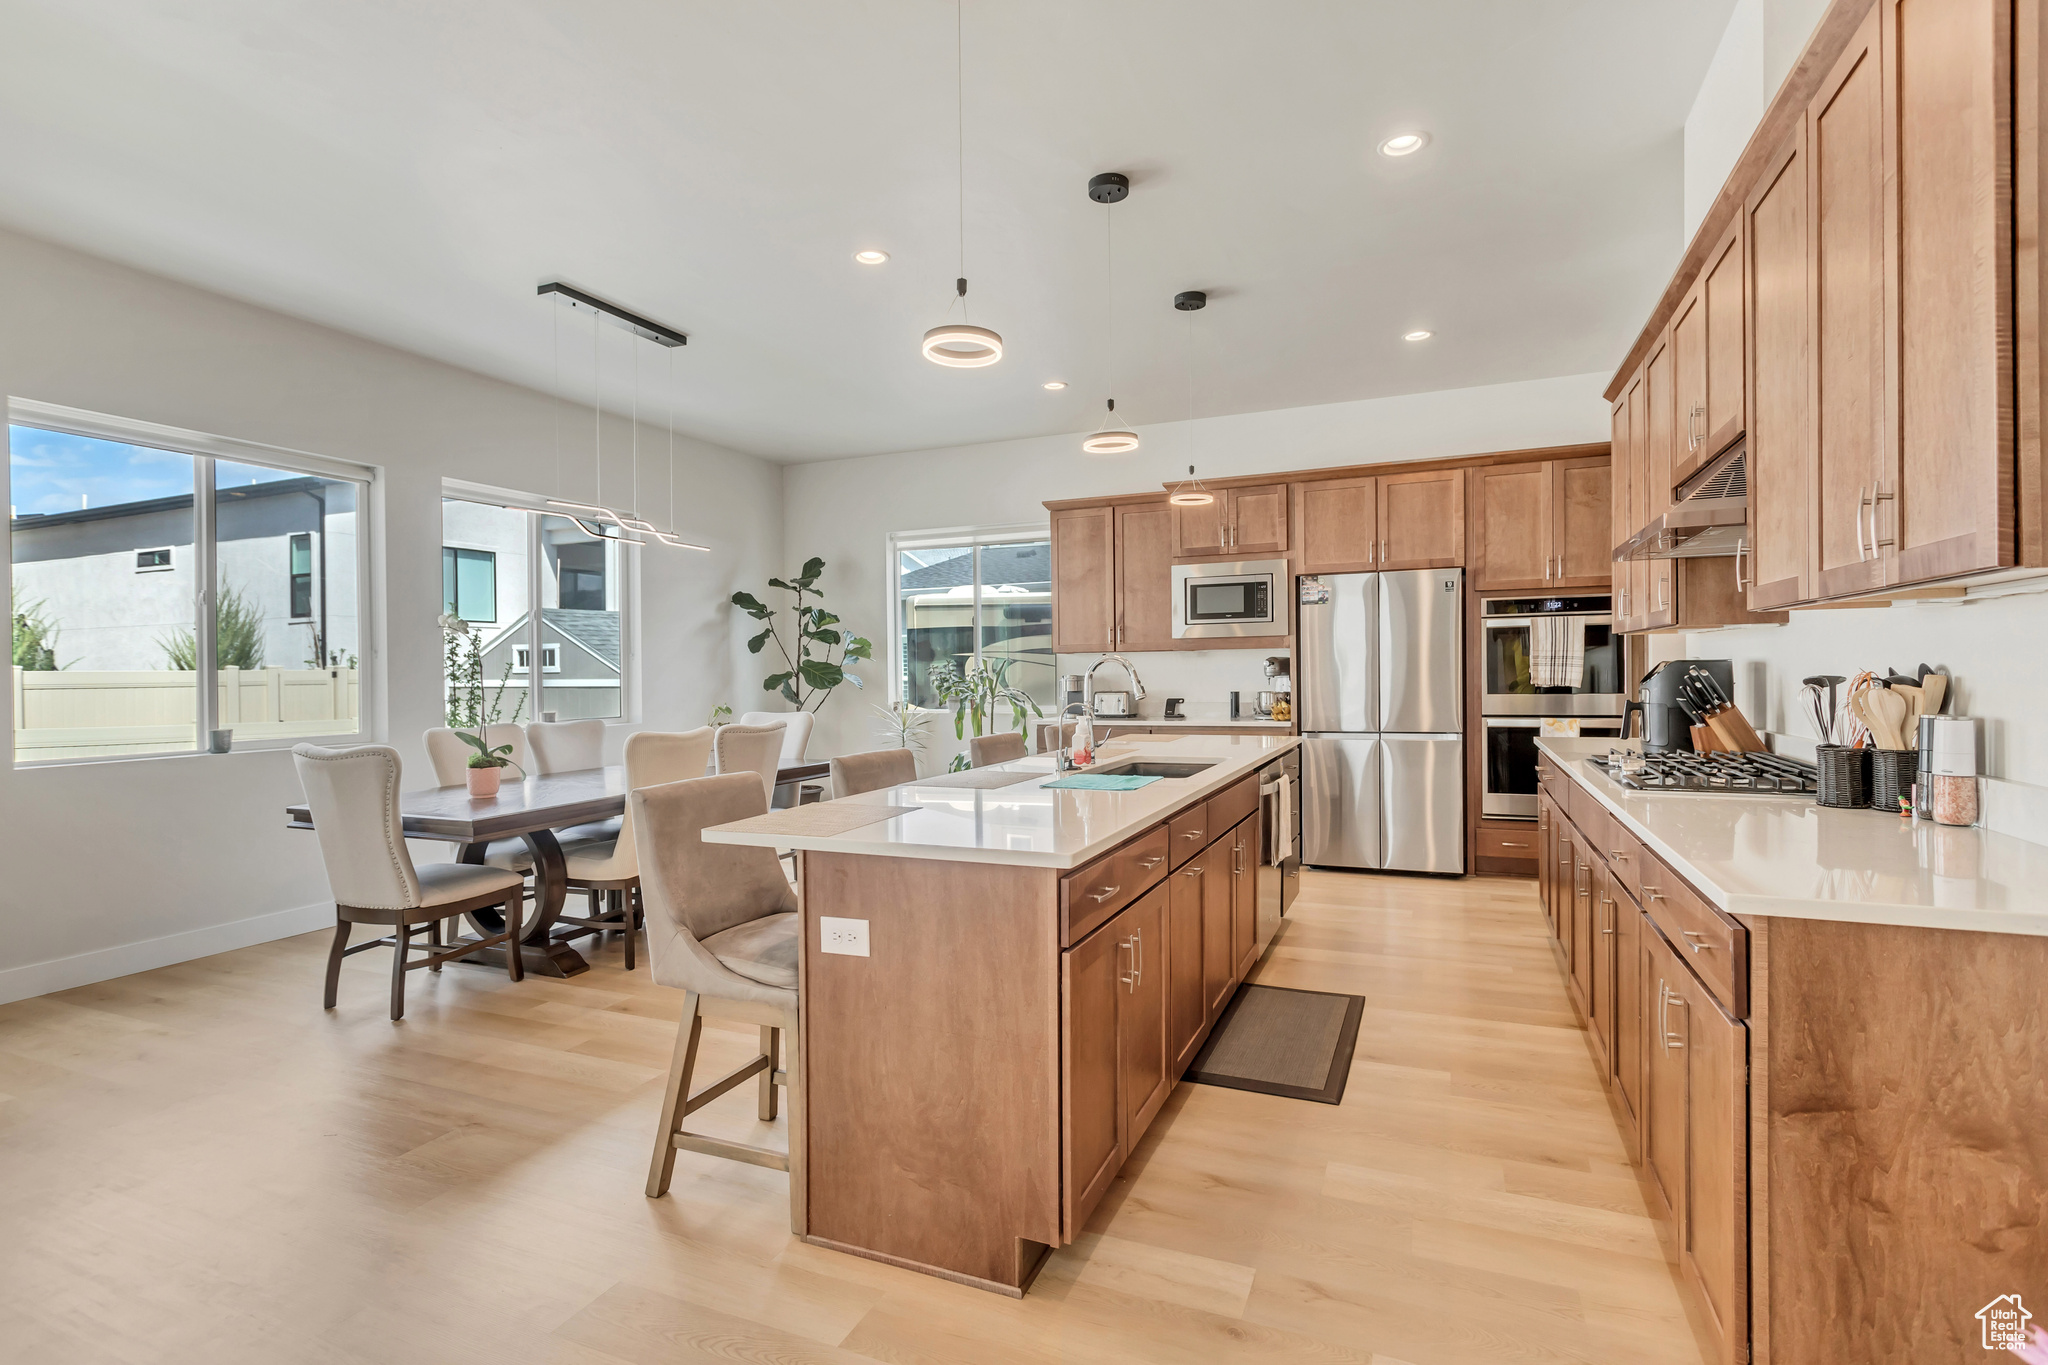 Kitchen with a kitchen bar, appliances with stainless steel finishes, light hardwood / wood-style flooring, a center island with sink, and pendant lighting